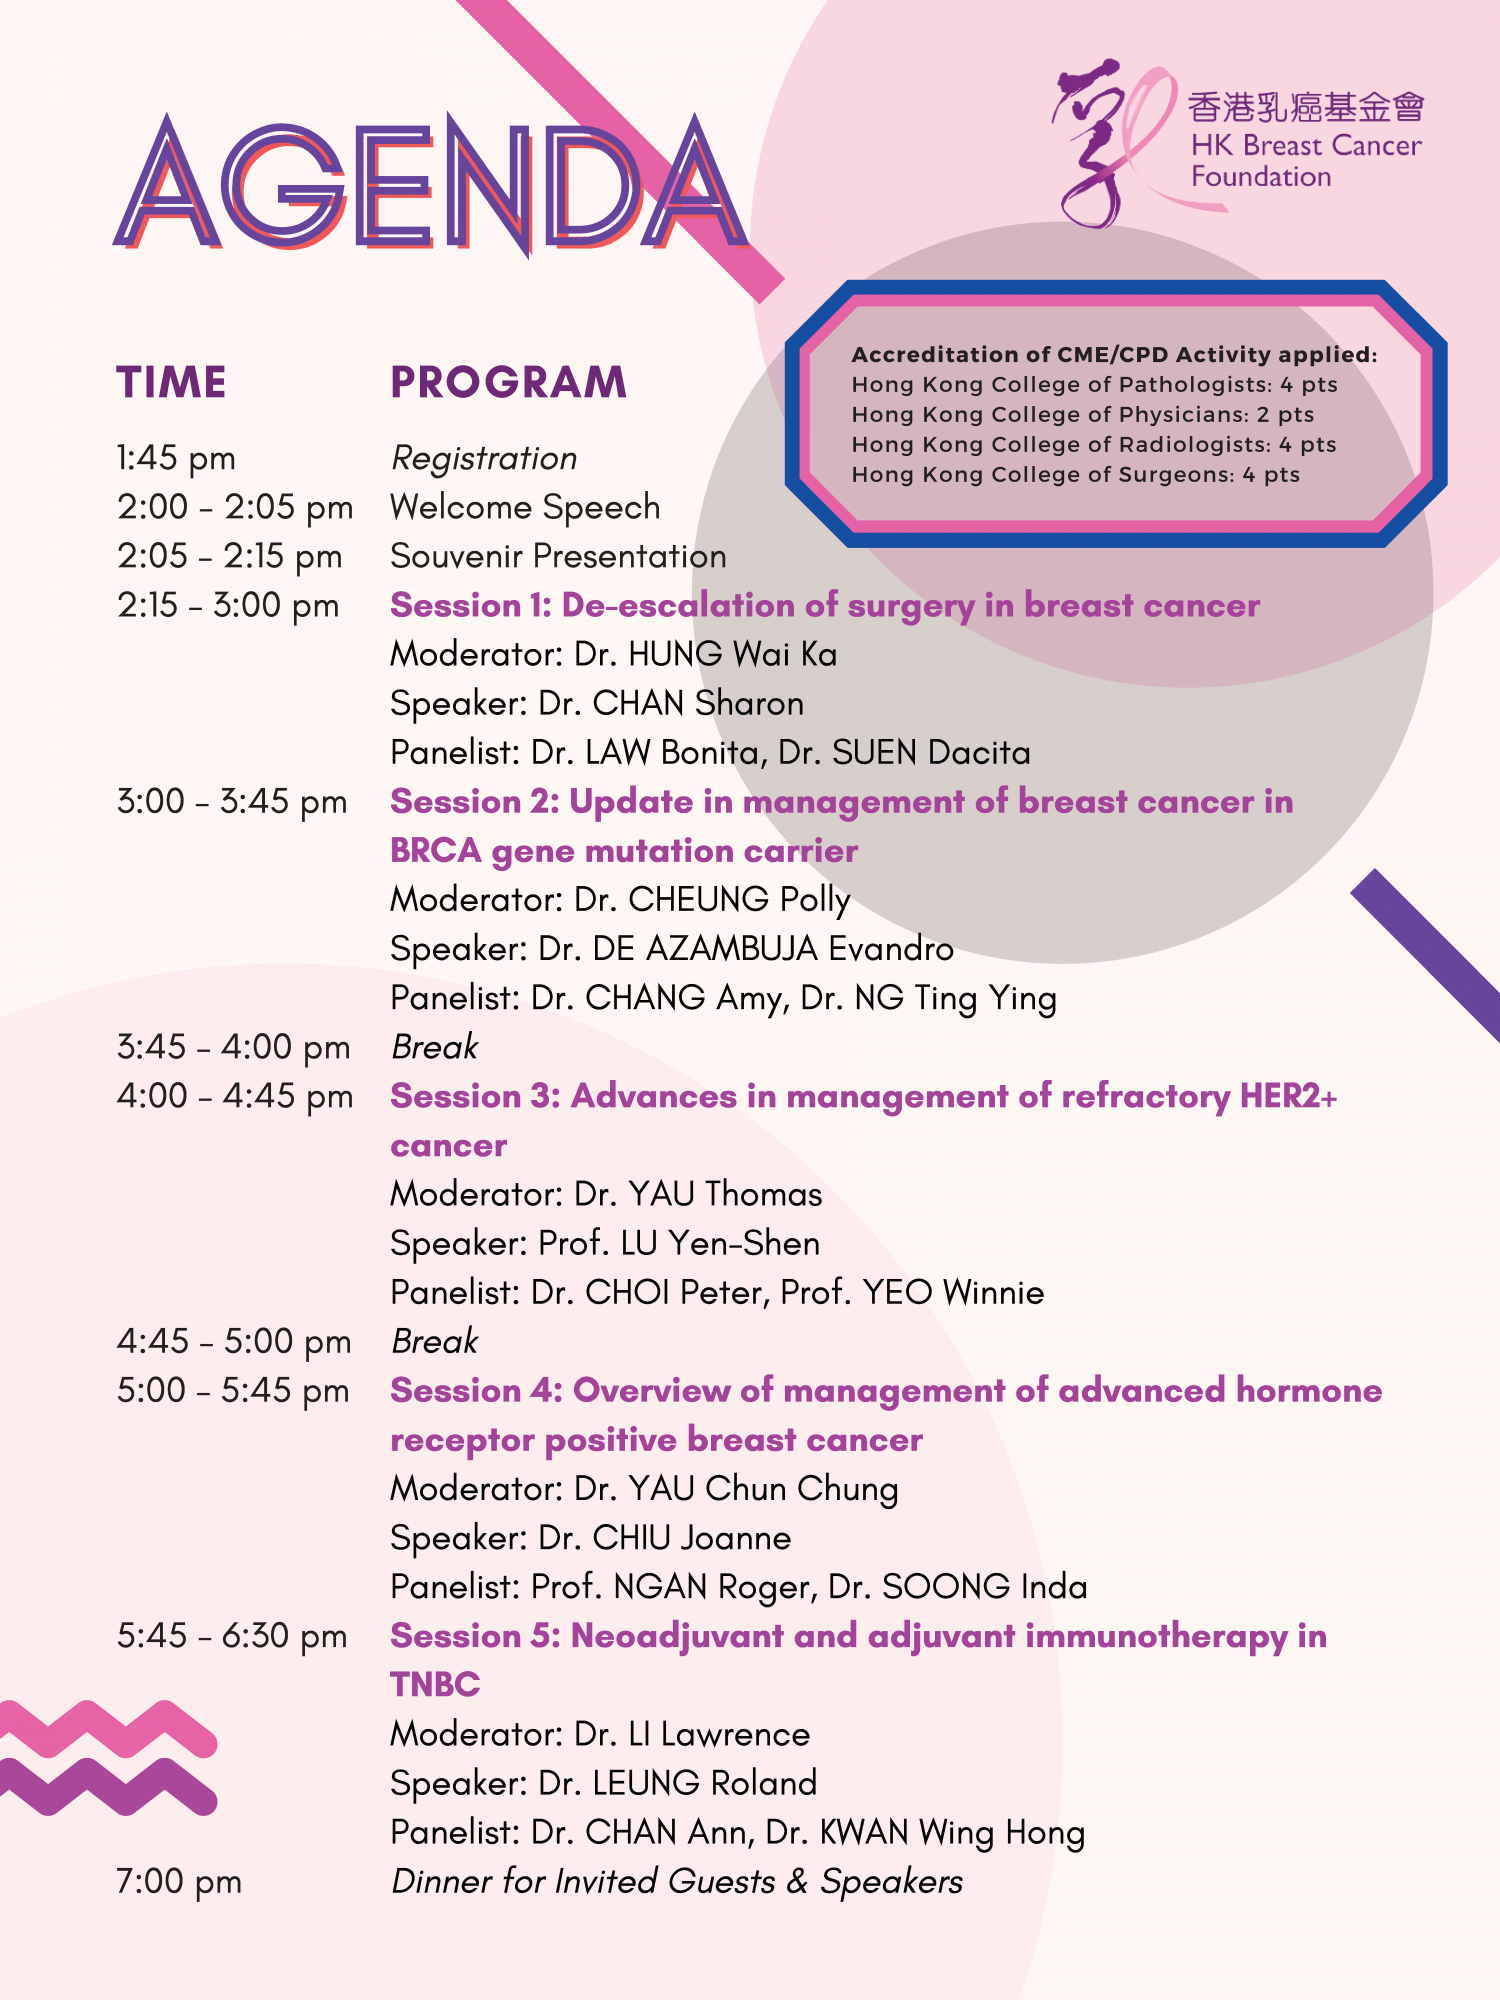 Self Photos / Files - HKBCF ASM 2021 Poster & Program Schedule_Invited Guests_Page_2